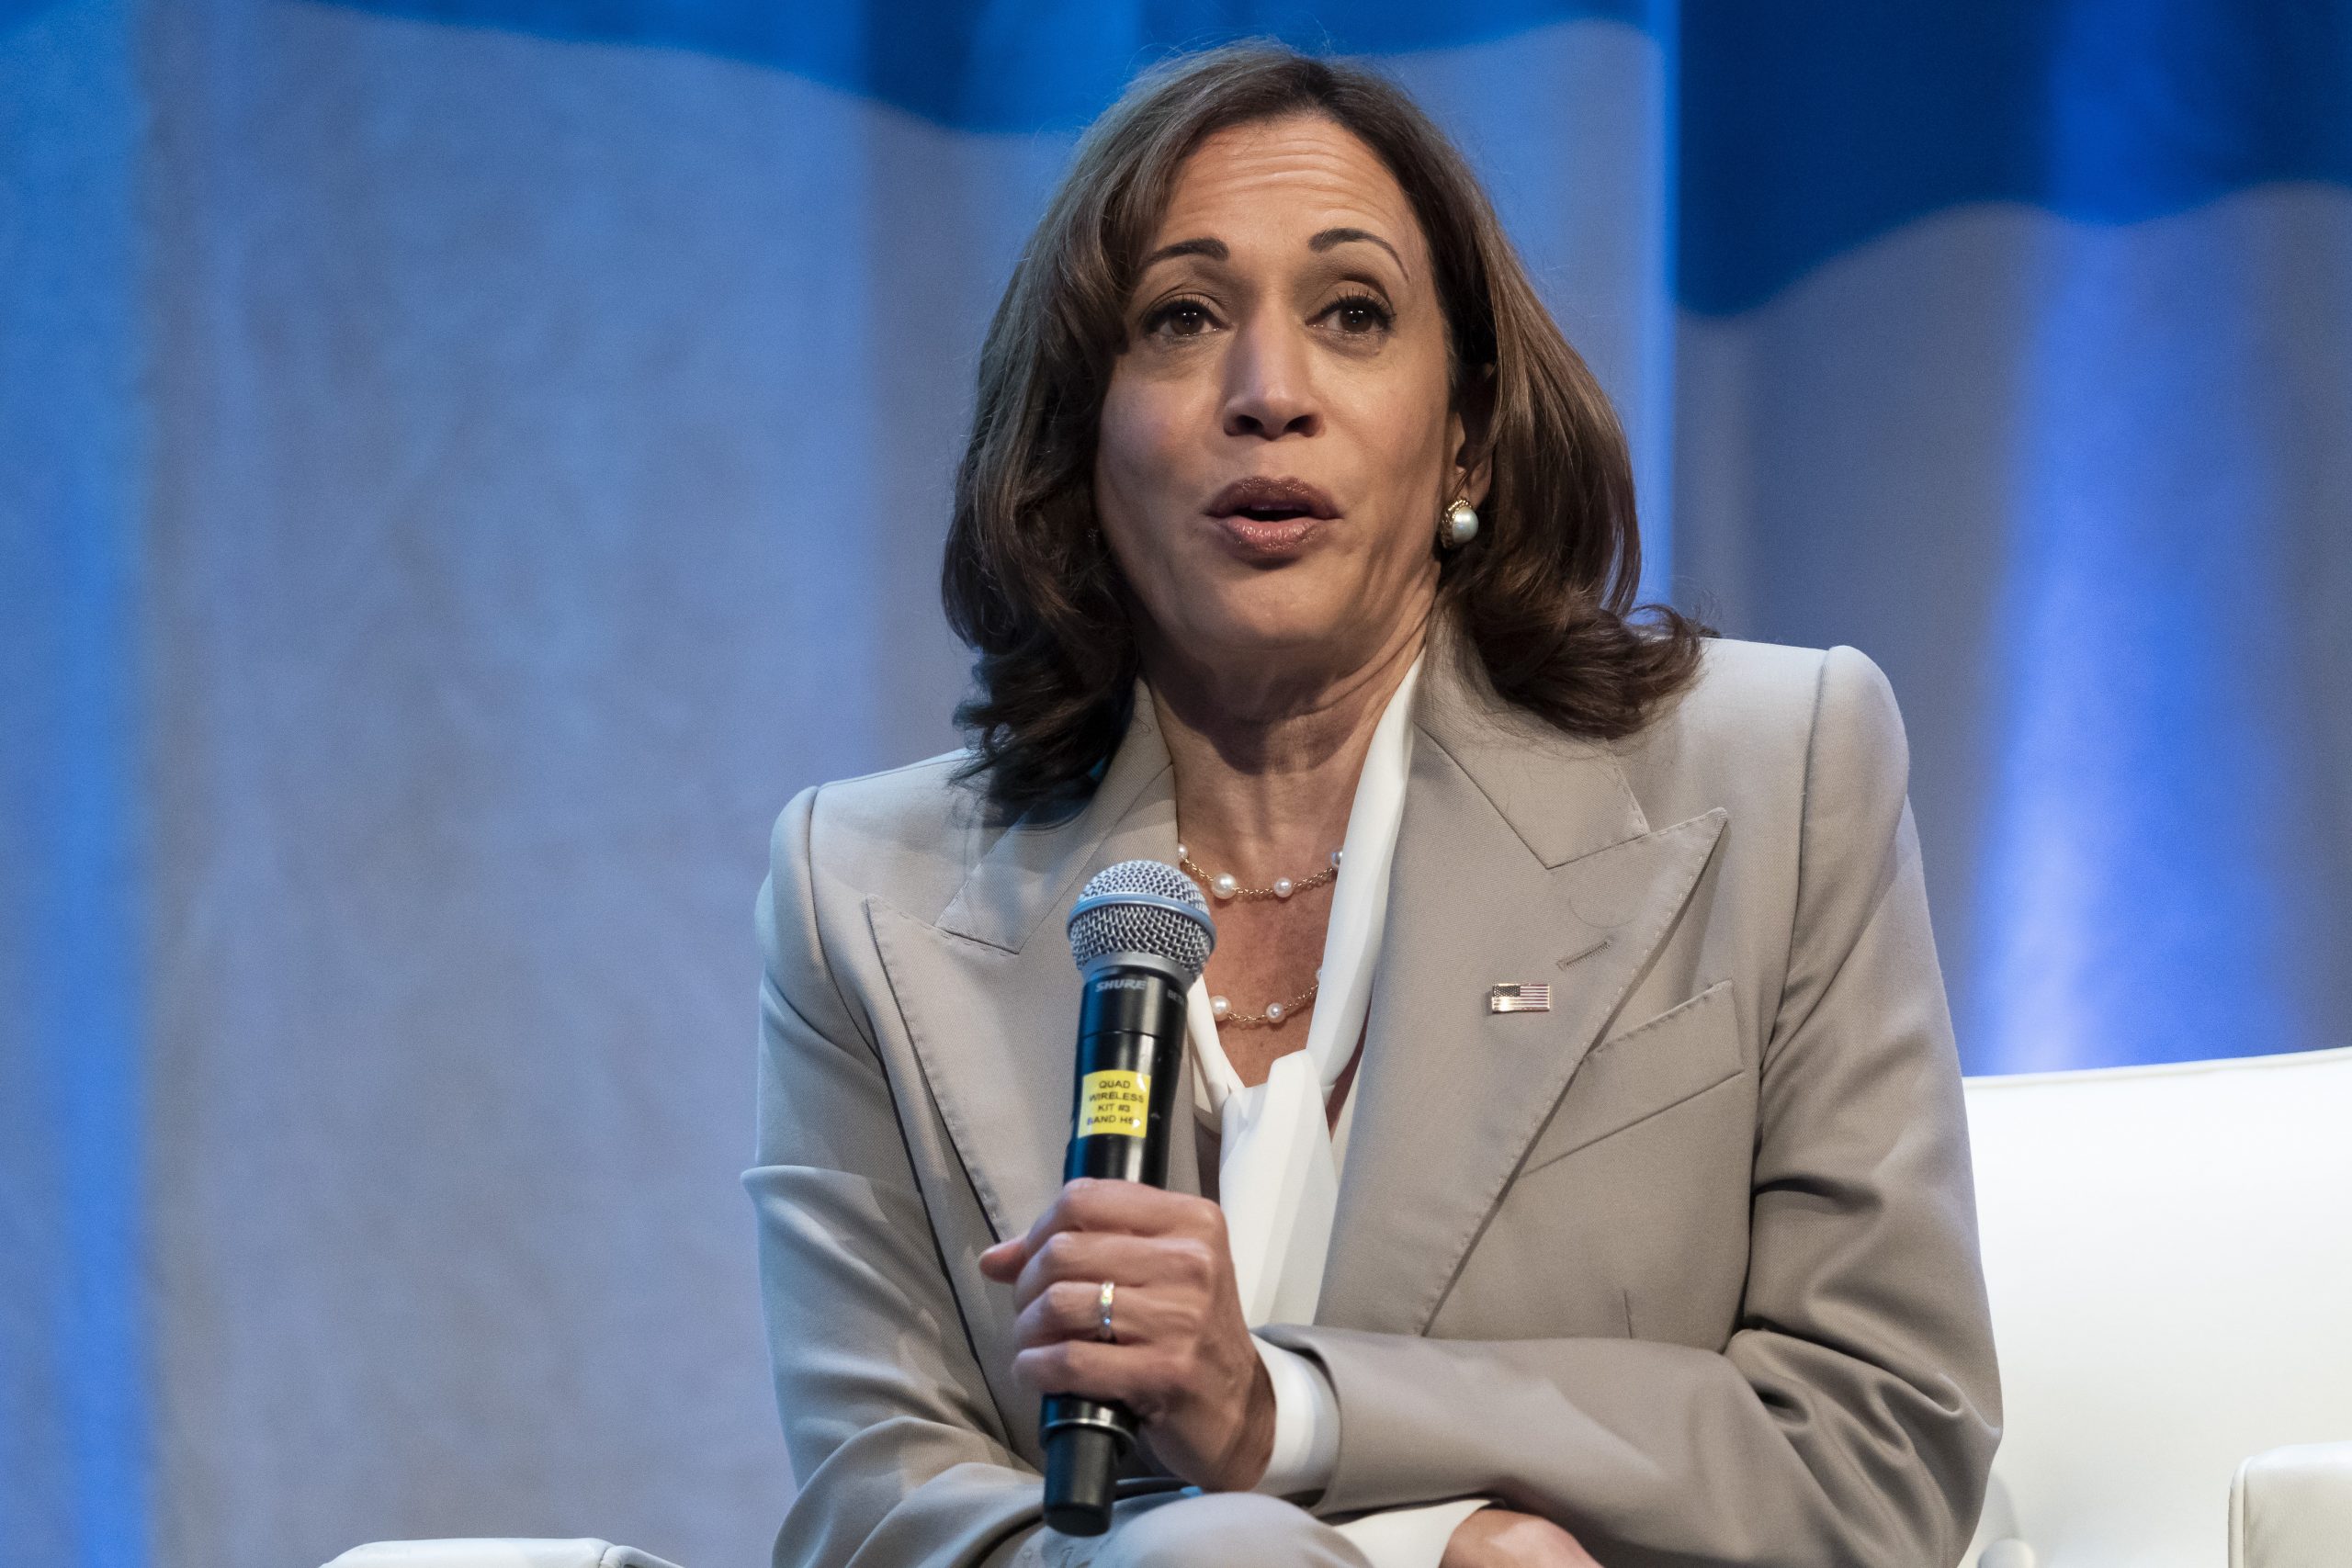 Harris heading to Indiana as state GOP prepares new abortion ban